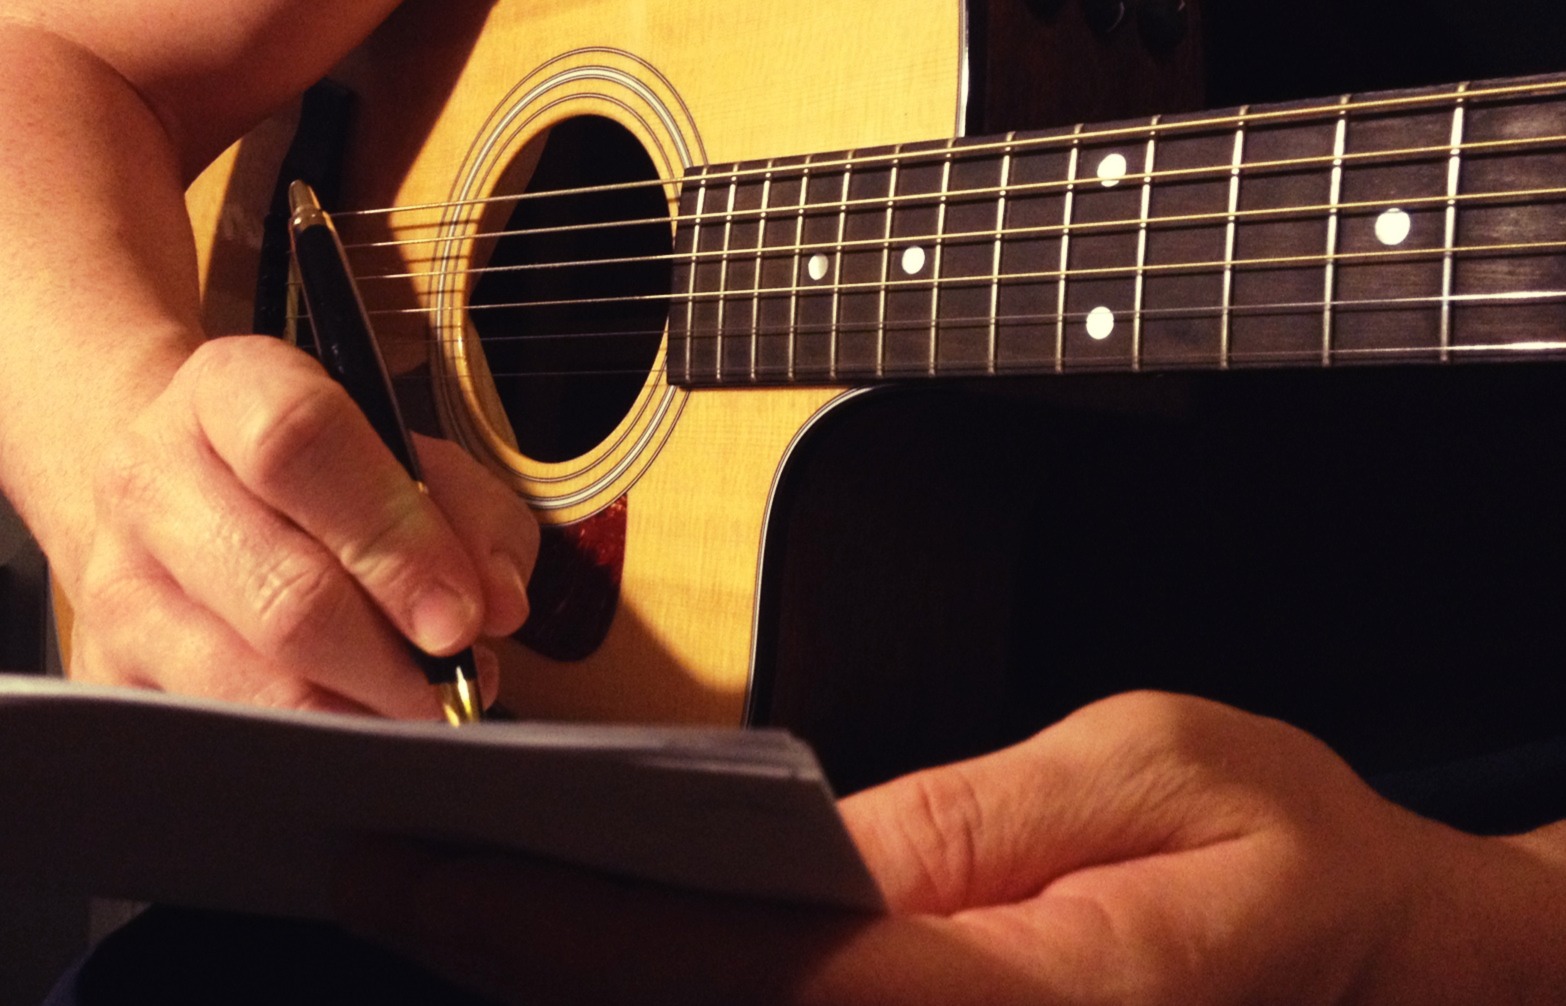 Stock photo of someone writing songs on an acoustic guitar